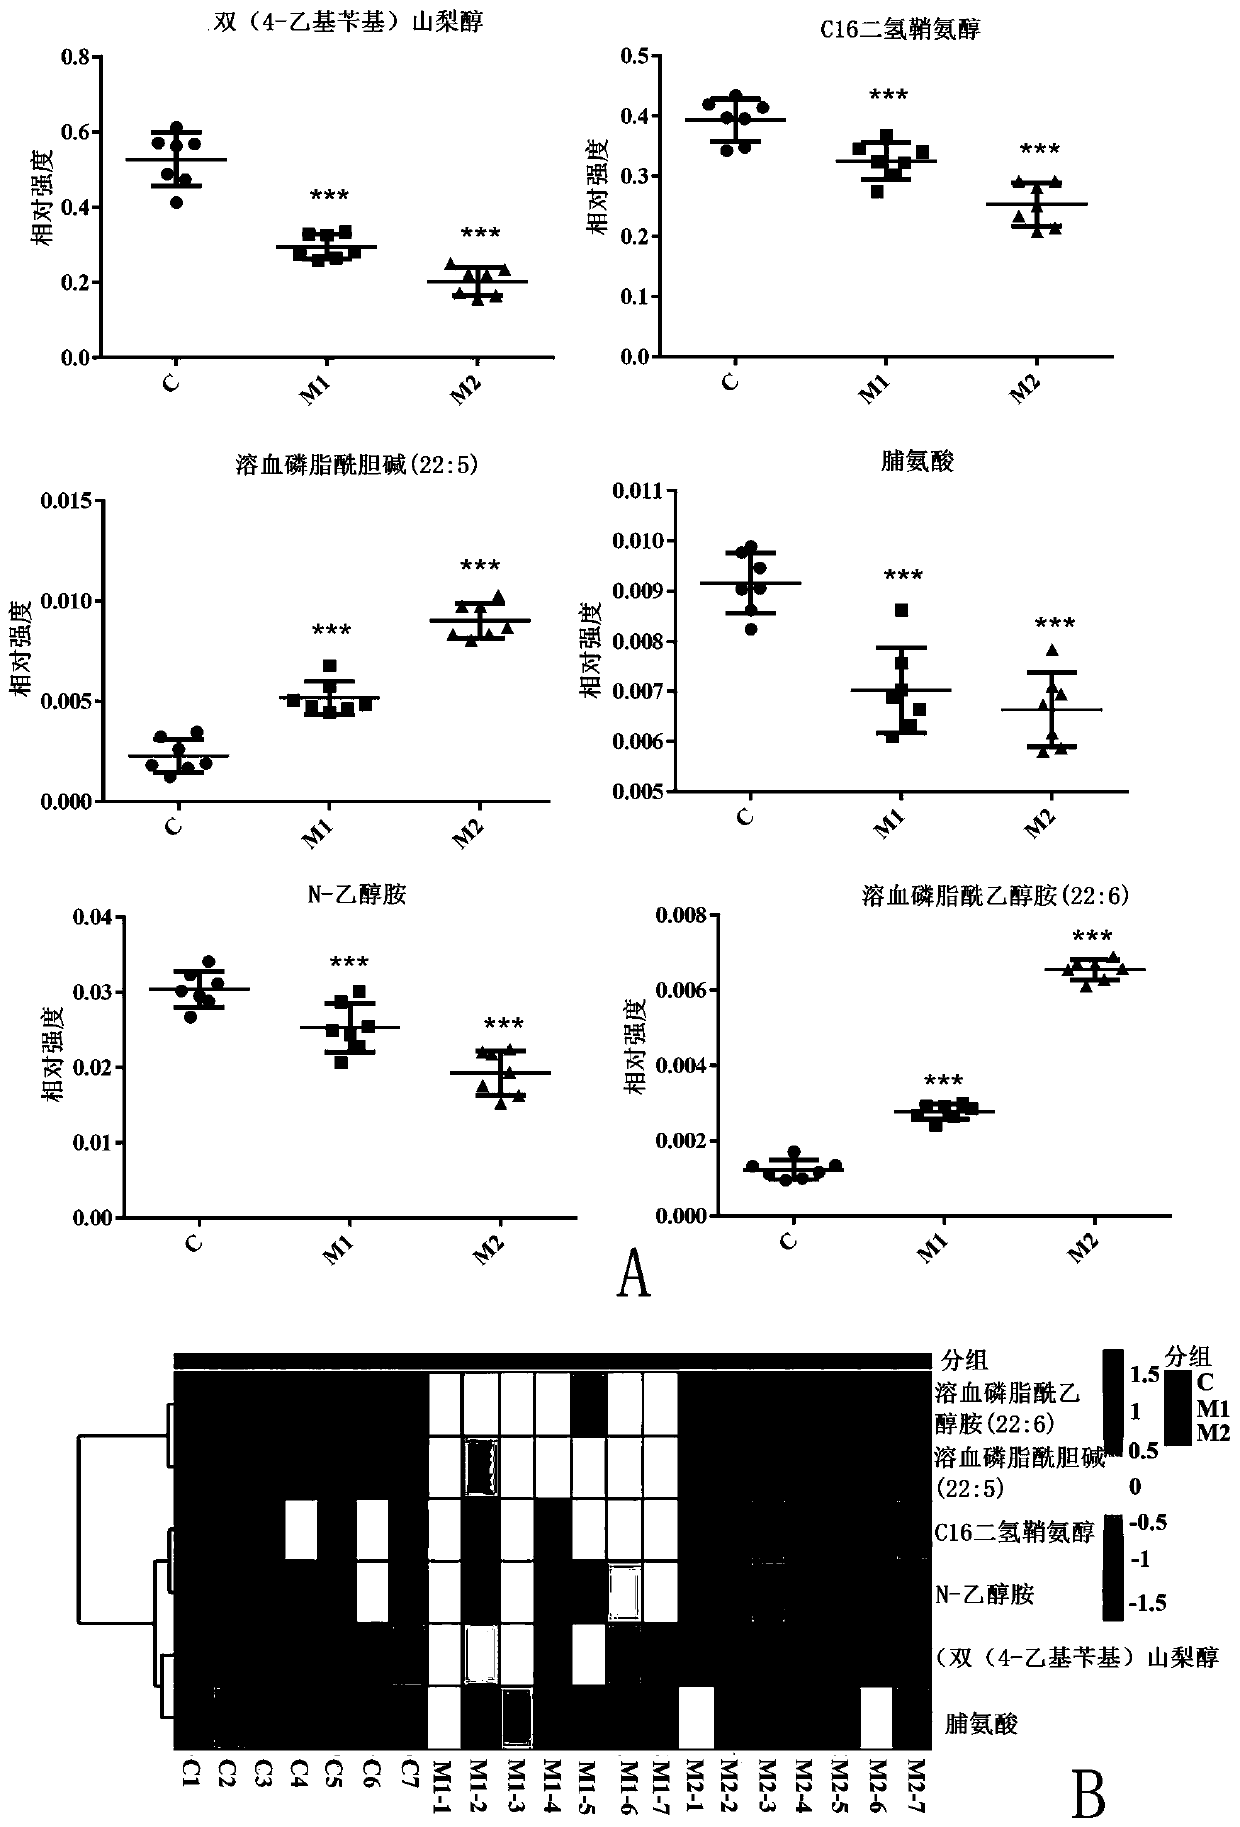 Nephrotic syndrome progression-related metabolic markers and application thereof